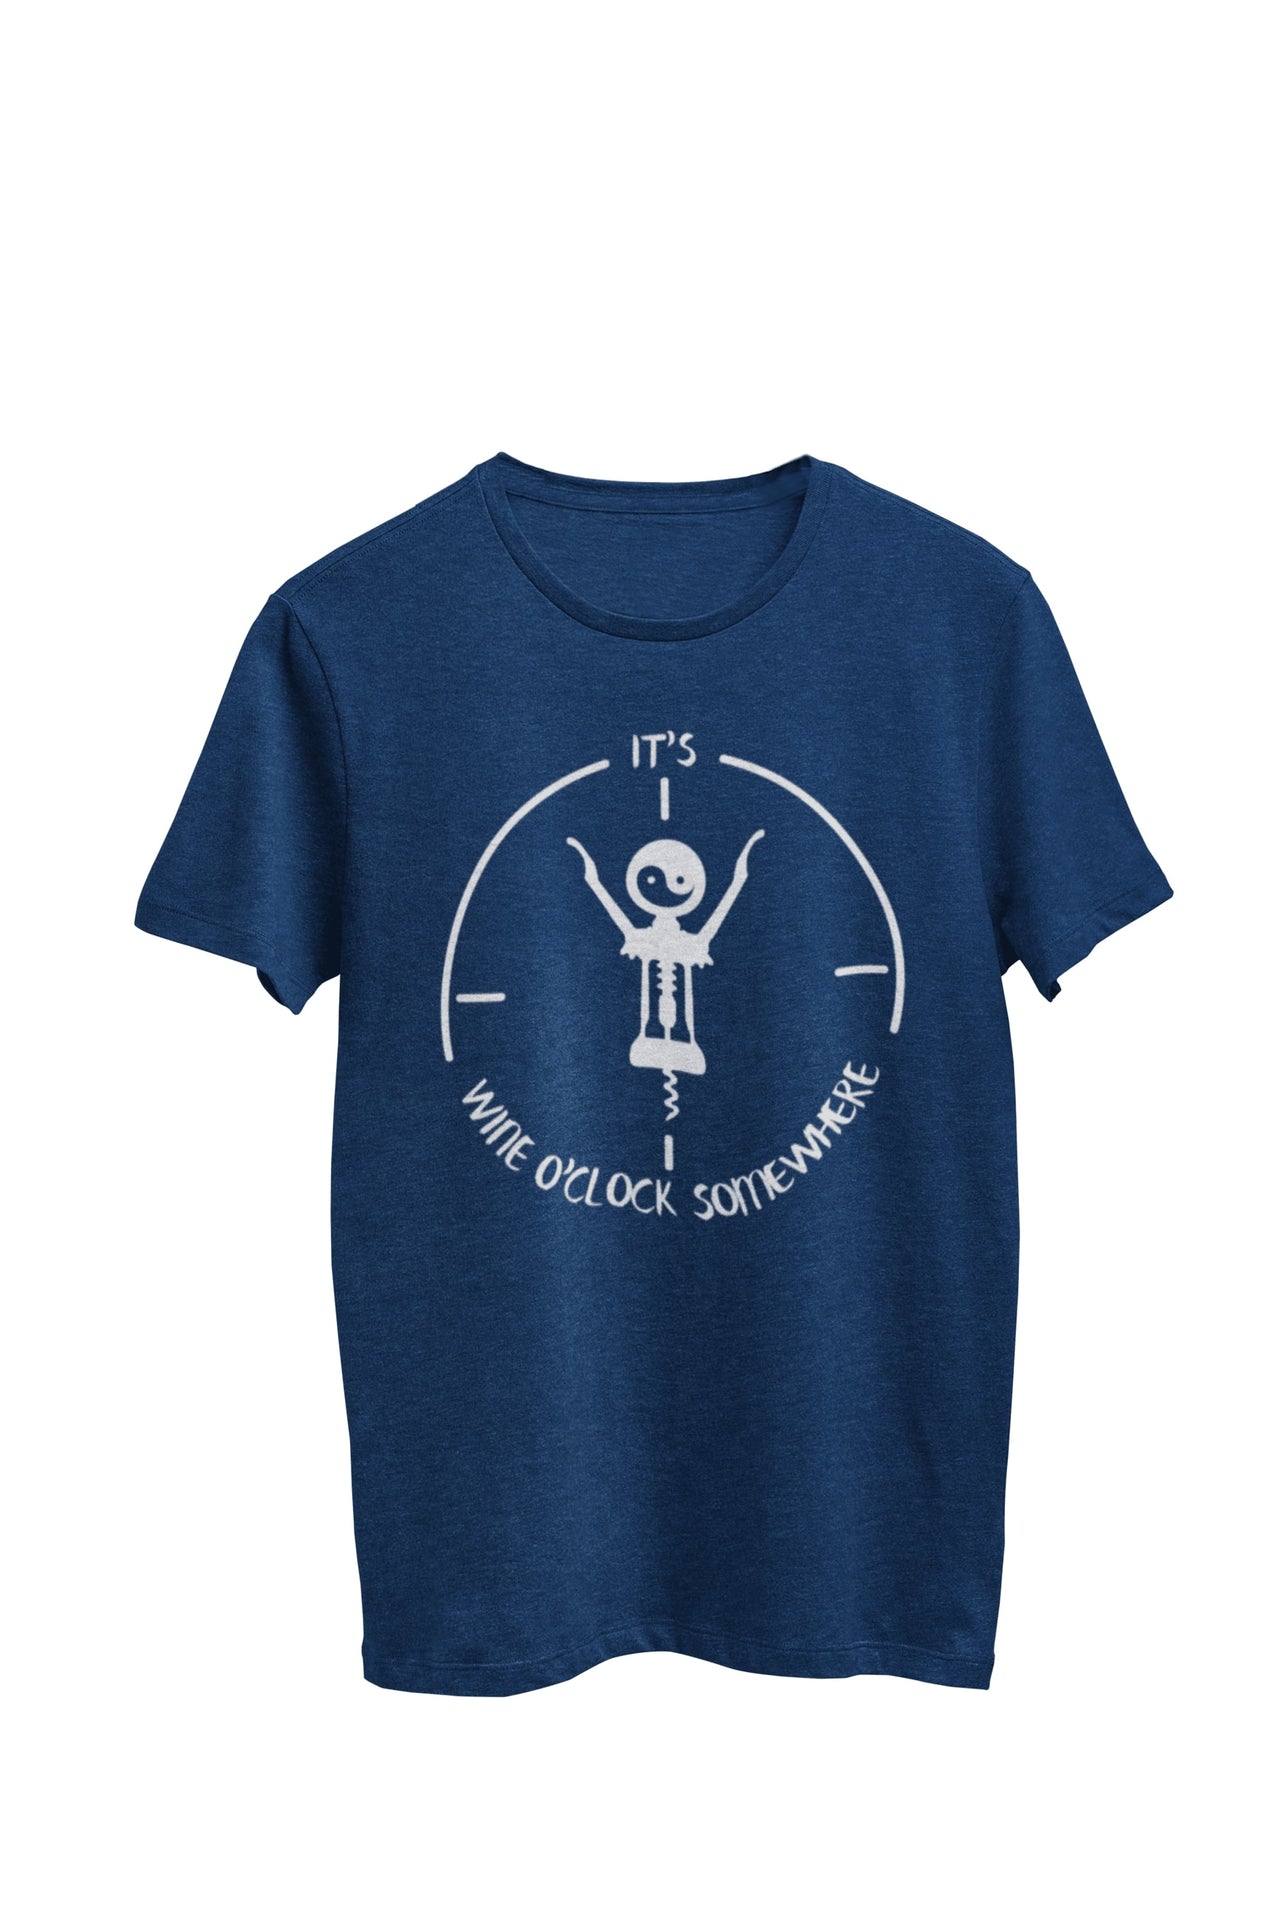 Navy Heather Unisex T-shirt featuring the text 'It's wine o'clock somewhere,' accompanied by an image of a wine cork as the hands of a clock, with a yin yang symbol on the face. Designed by WooHoo Apparel.